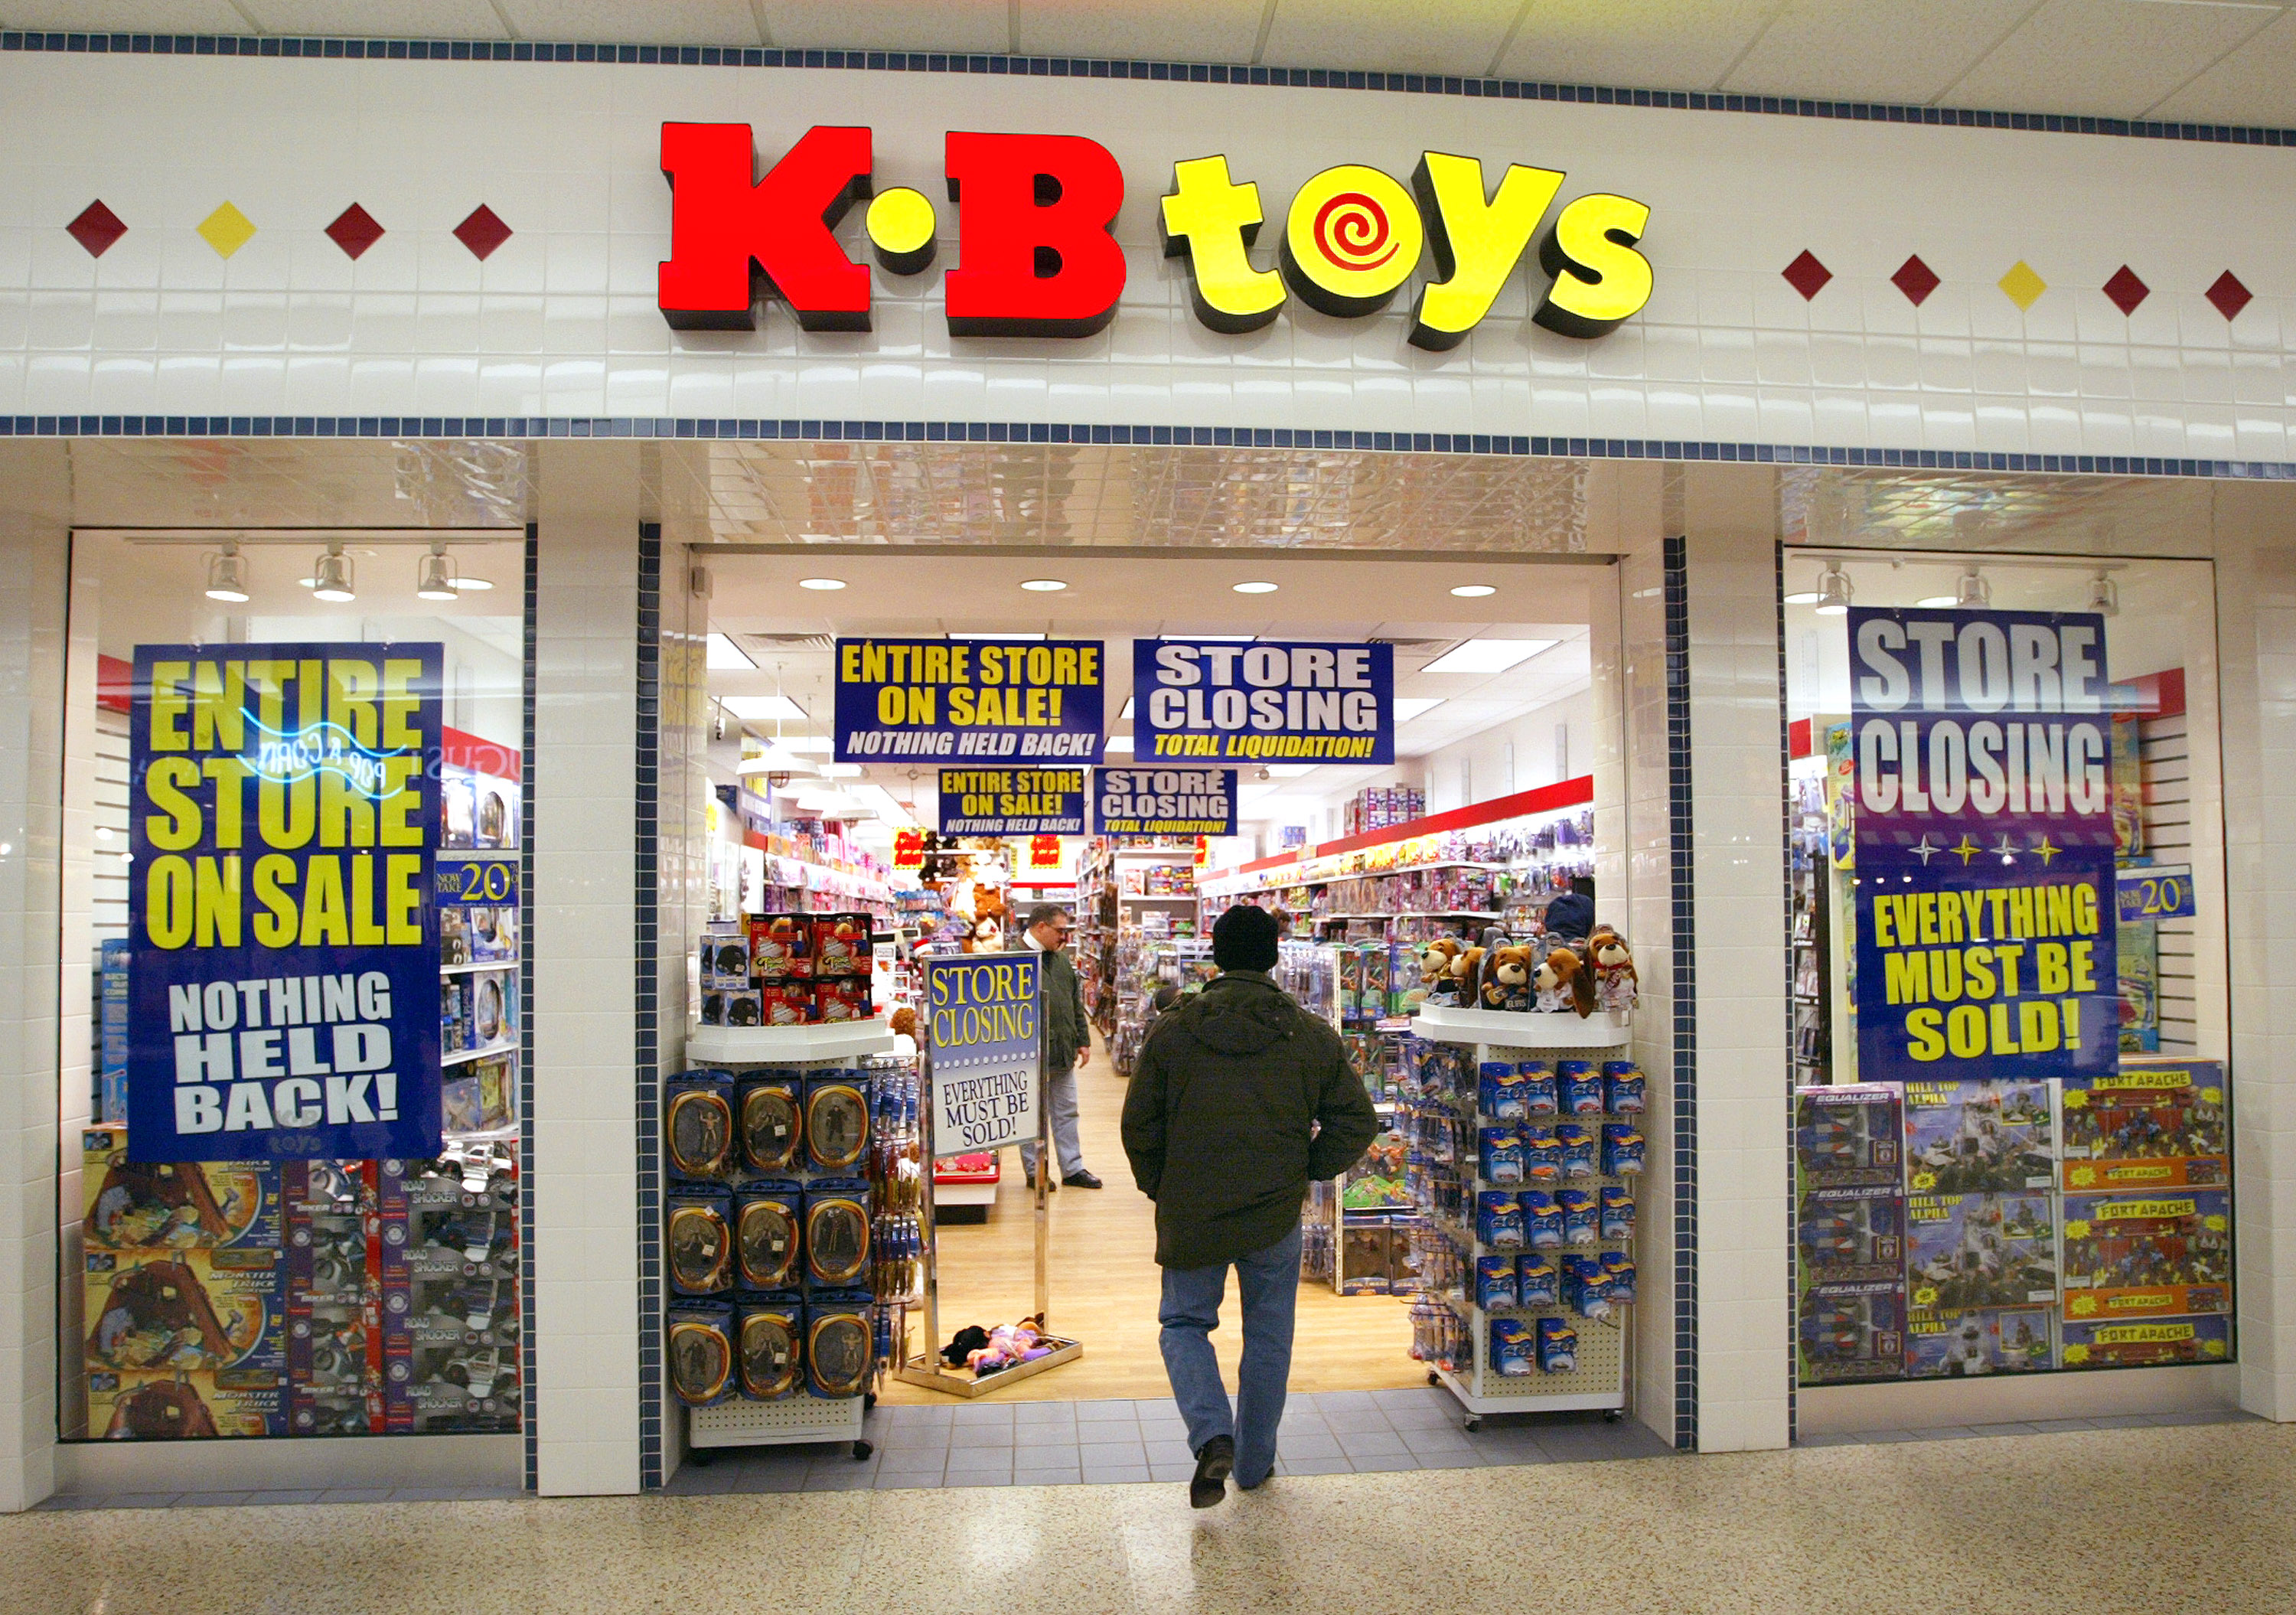 A K.B. Toys store going out of business in 2004.